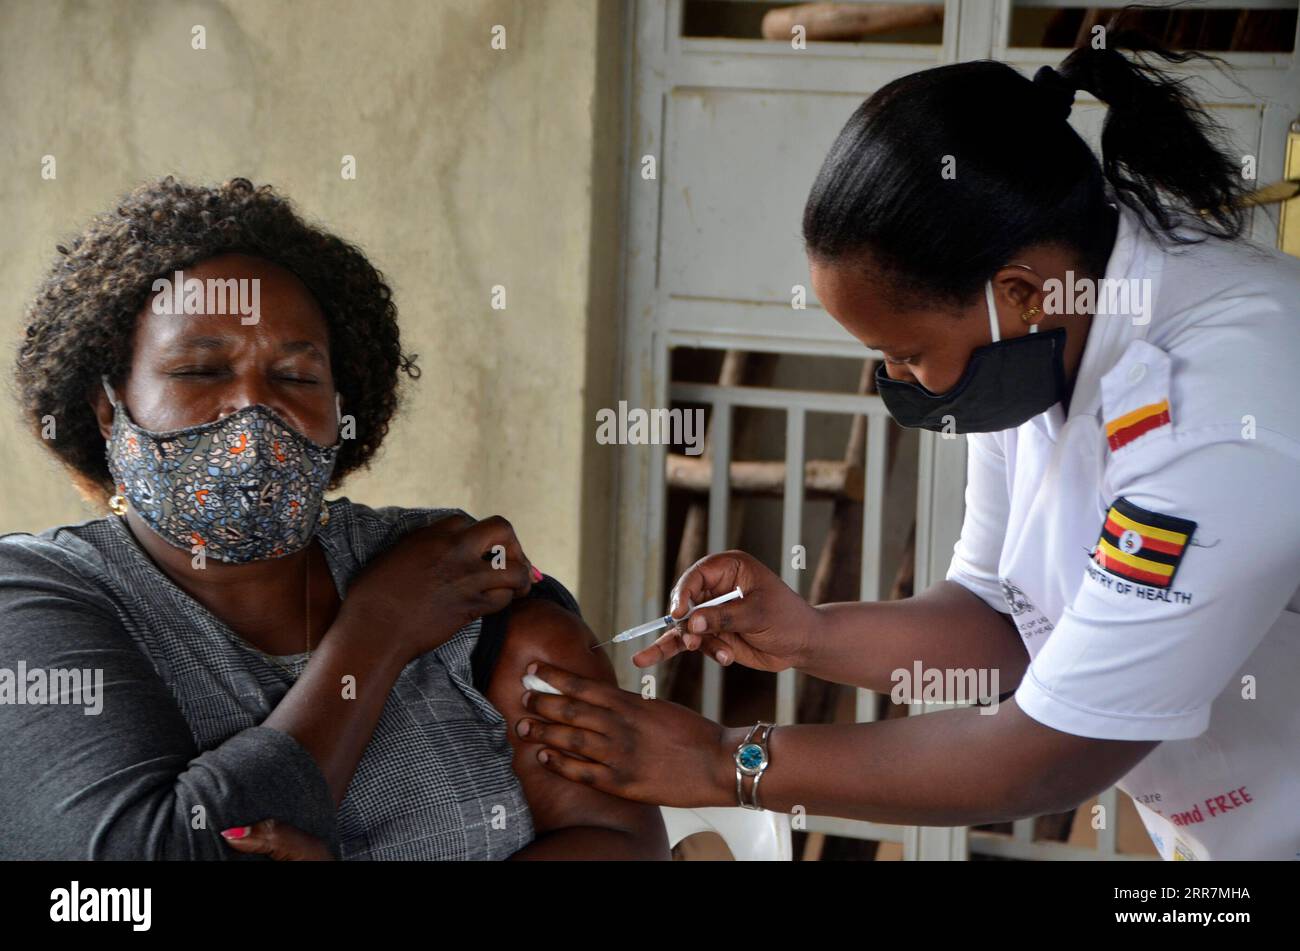 210331 -- KAMPALA, March 31, 2021 -- A teacher receives a dose of COVID-19 vaccine at a health center in Kampala, capital of Uganda, March 31, 2021. Uganda launched the first phase of COVID-19 vaccination campaign on March 10, targeting high risk groups in the east African country. The ministry of health targets to vaccinate more than 21.9 million people who face the highest risk of the infection, which include health workers, teachers, security personnel, elderly and those with underlying medical conditions. Photo by /Xinhua UGANDA-KAMPALA-TEACHERS-VACCINATION NicholasxKajoba PUBLICATIONxNOTx Stock Photo